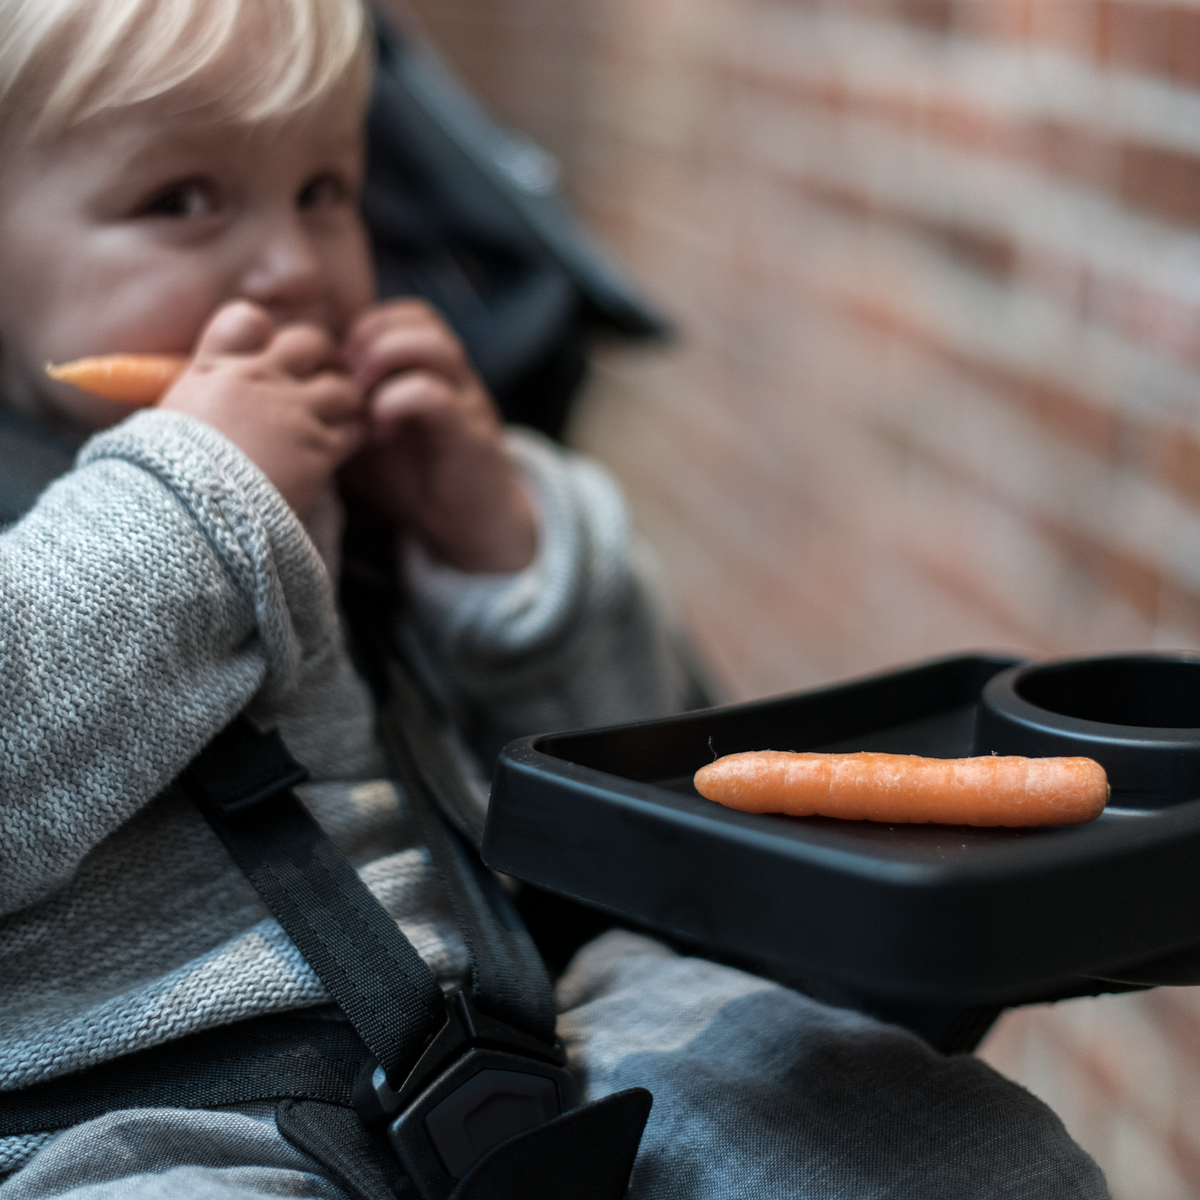 A toddler eats a carrot that is resting on the Thule Urban Glide 2 Snack Tray.